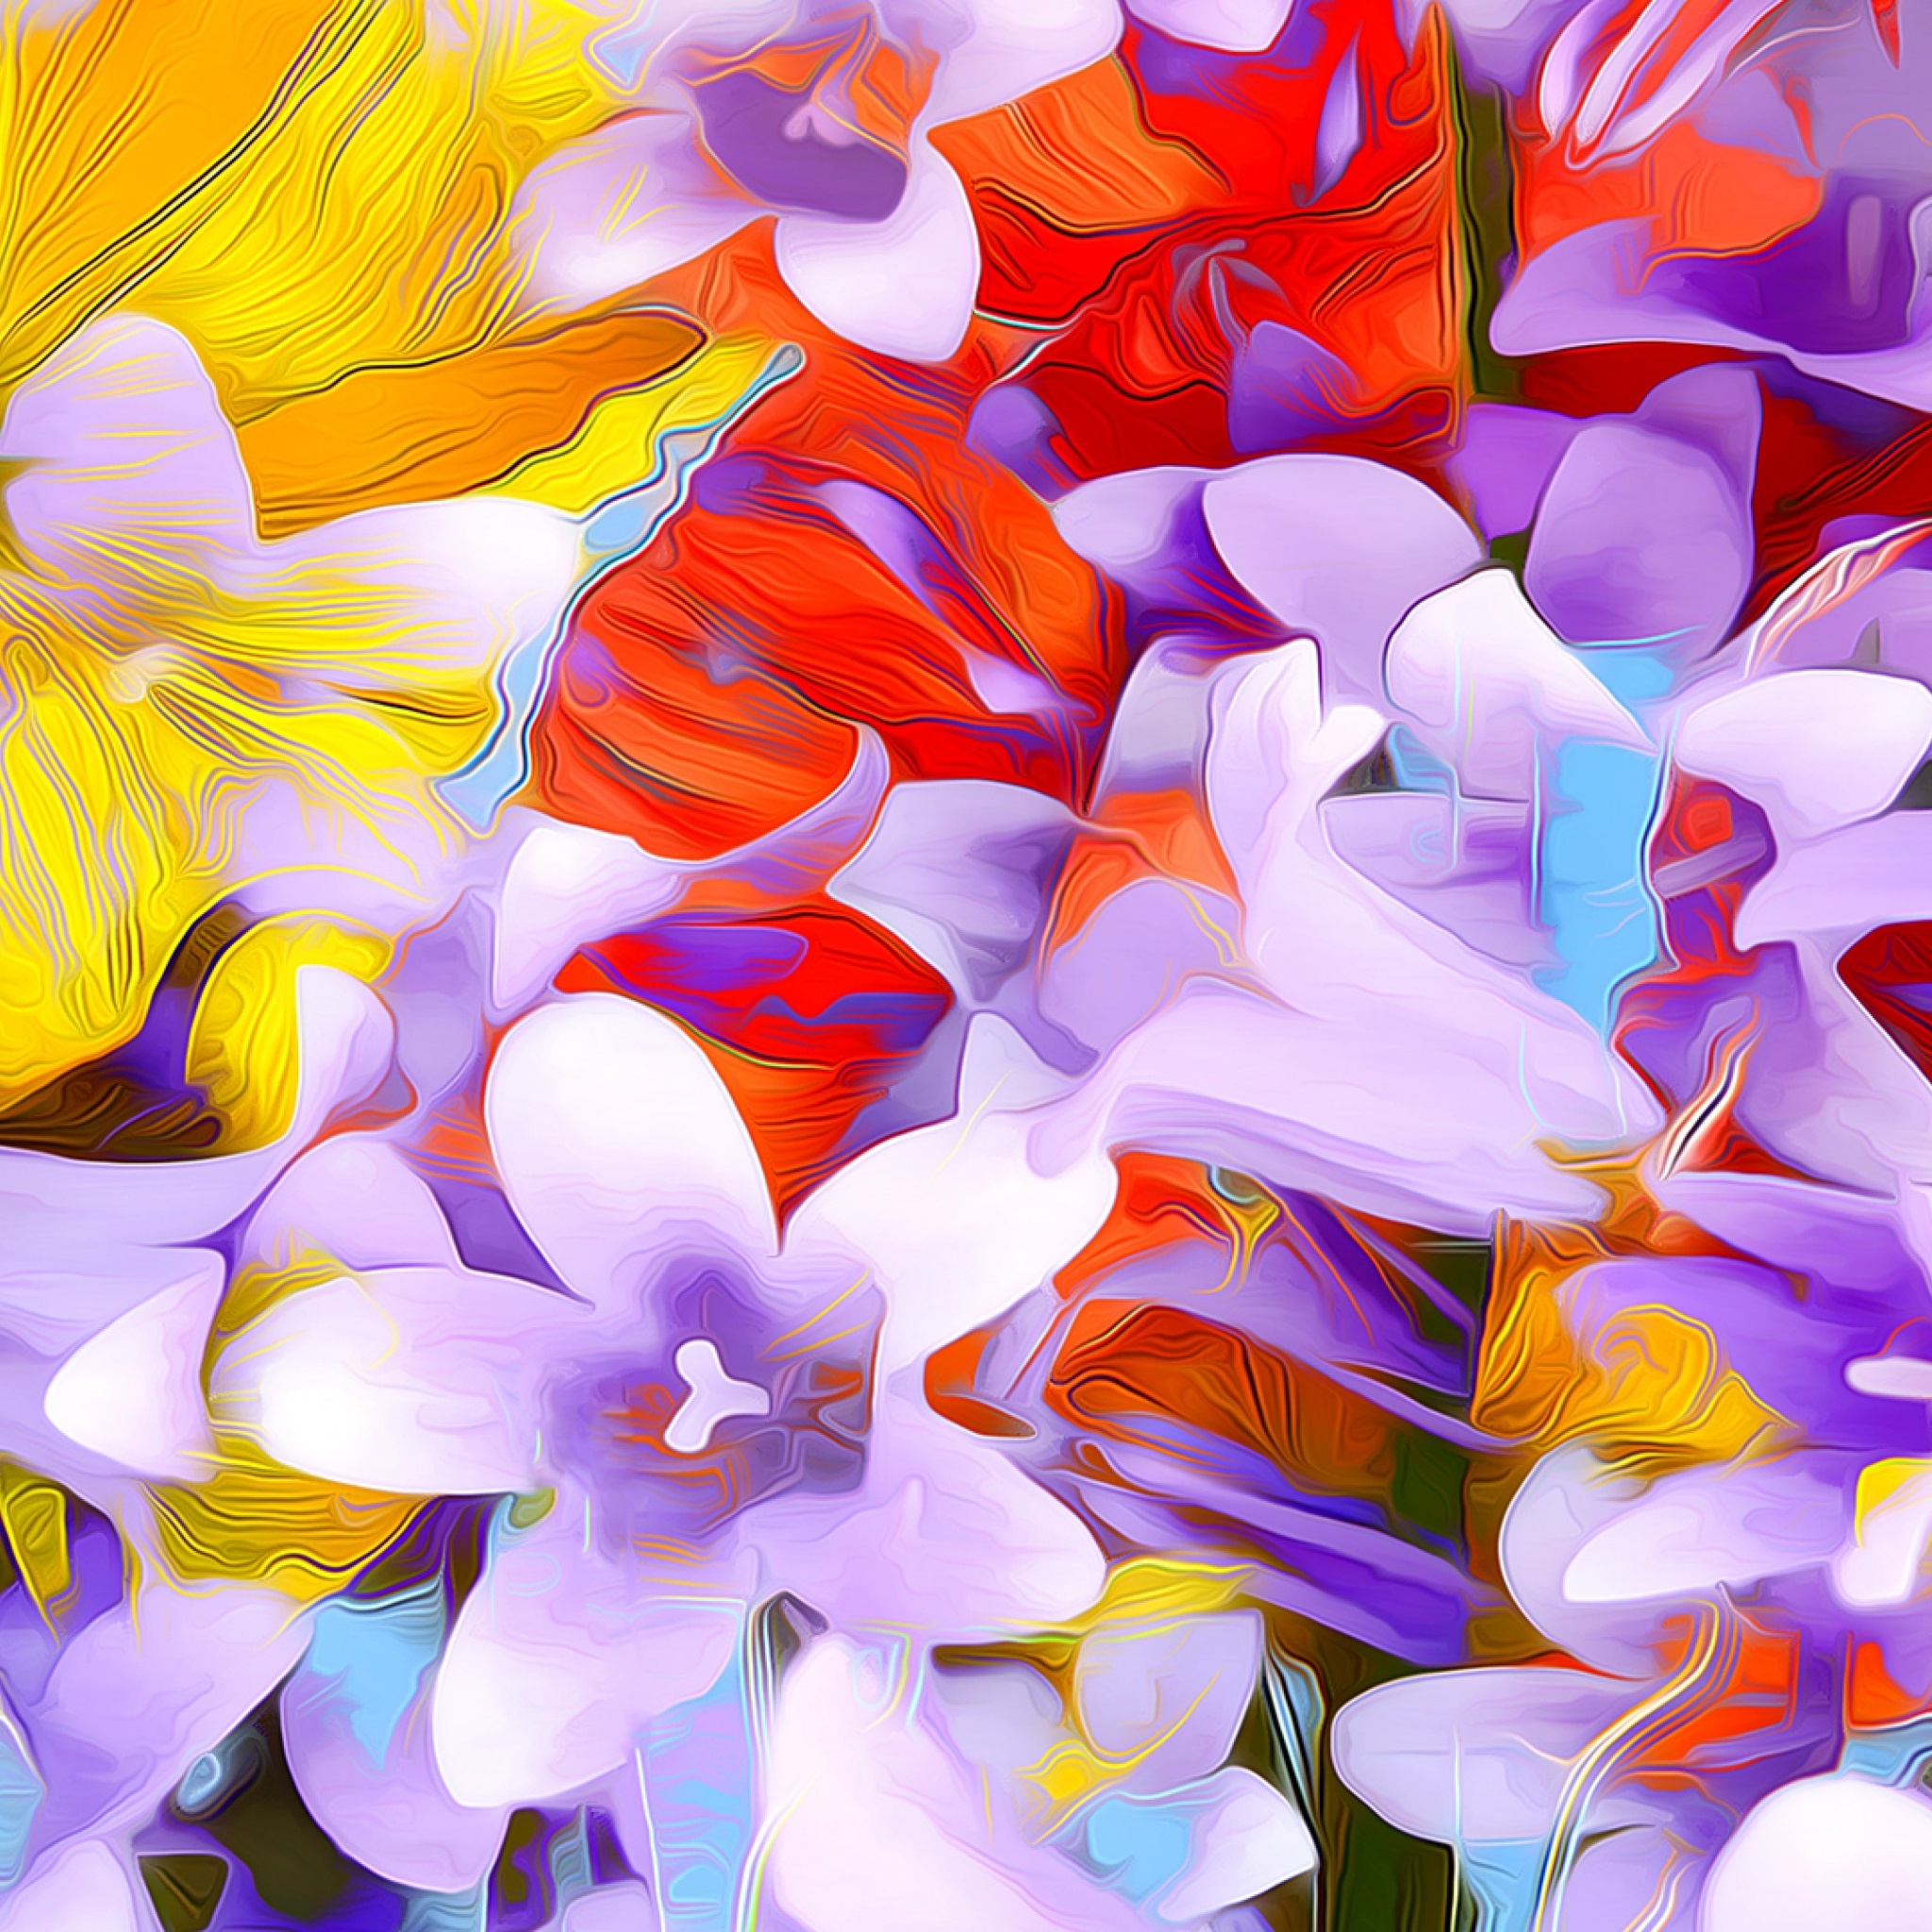 Flowers Art Abstraction (click to view) HD Wallpapers in 2048x2048 Resolution